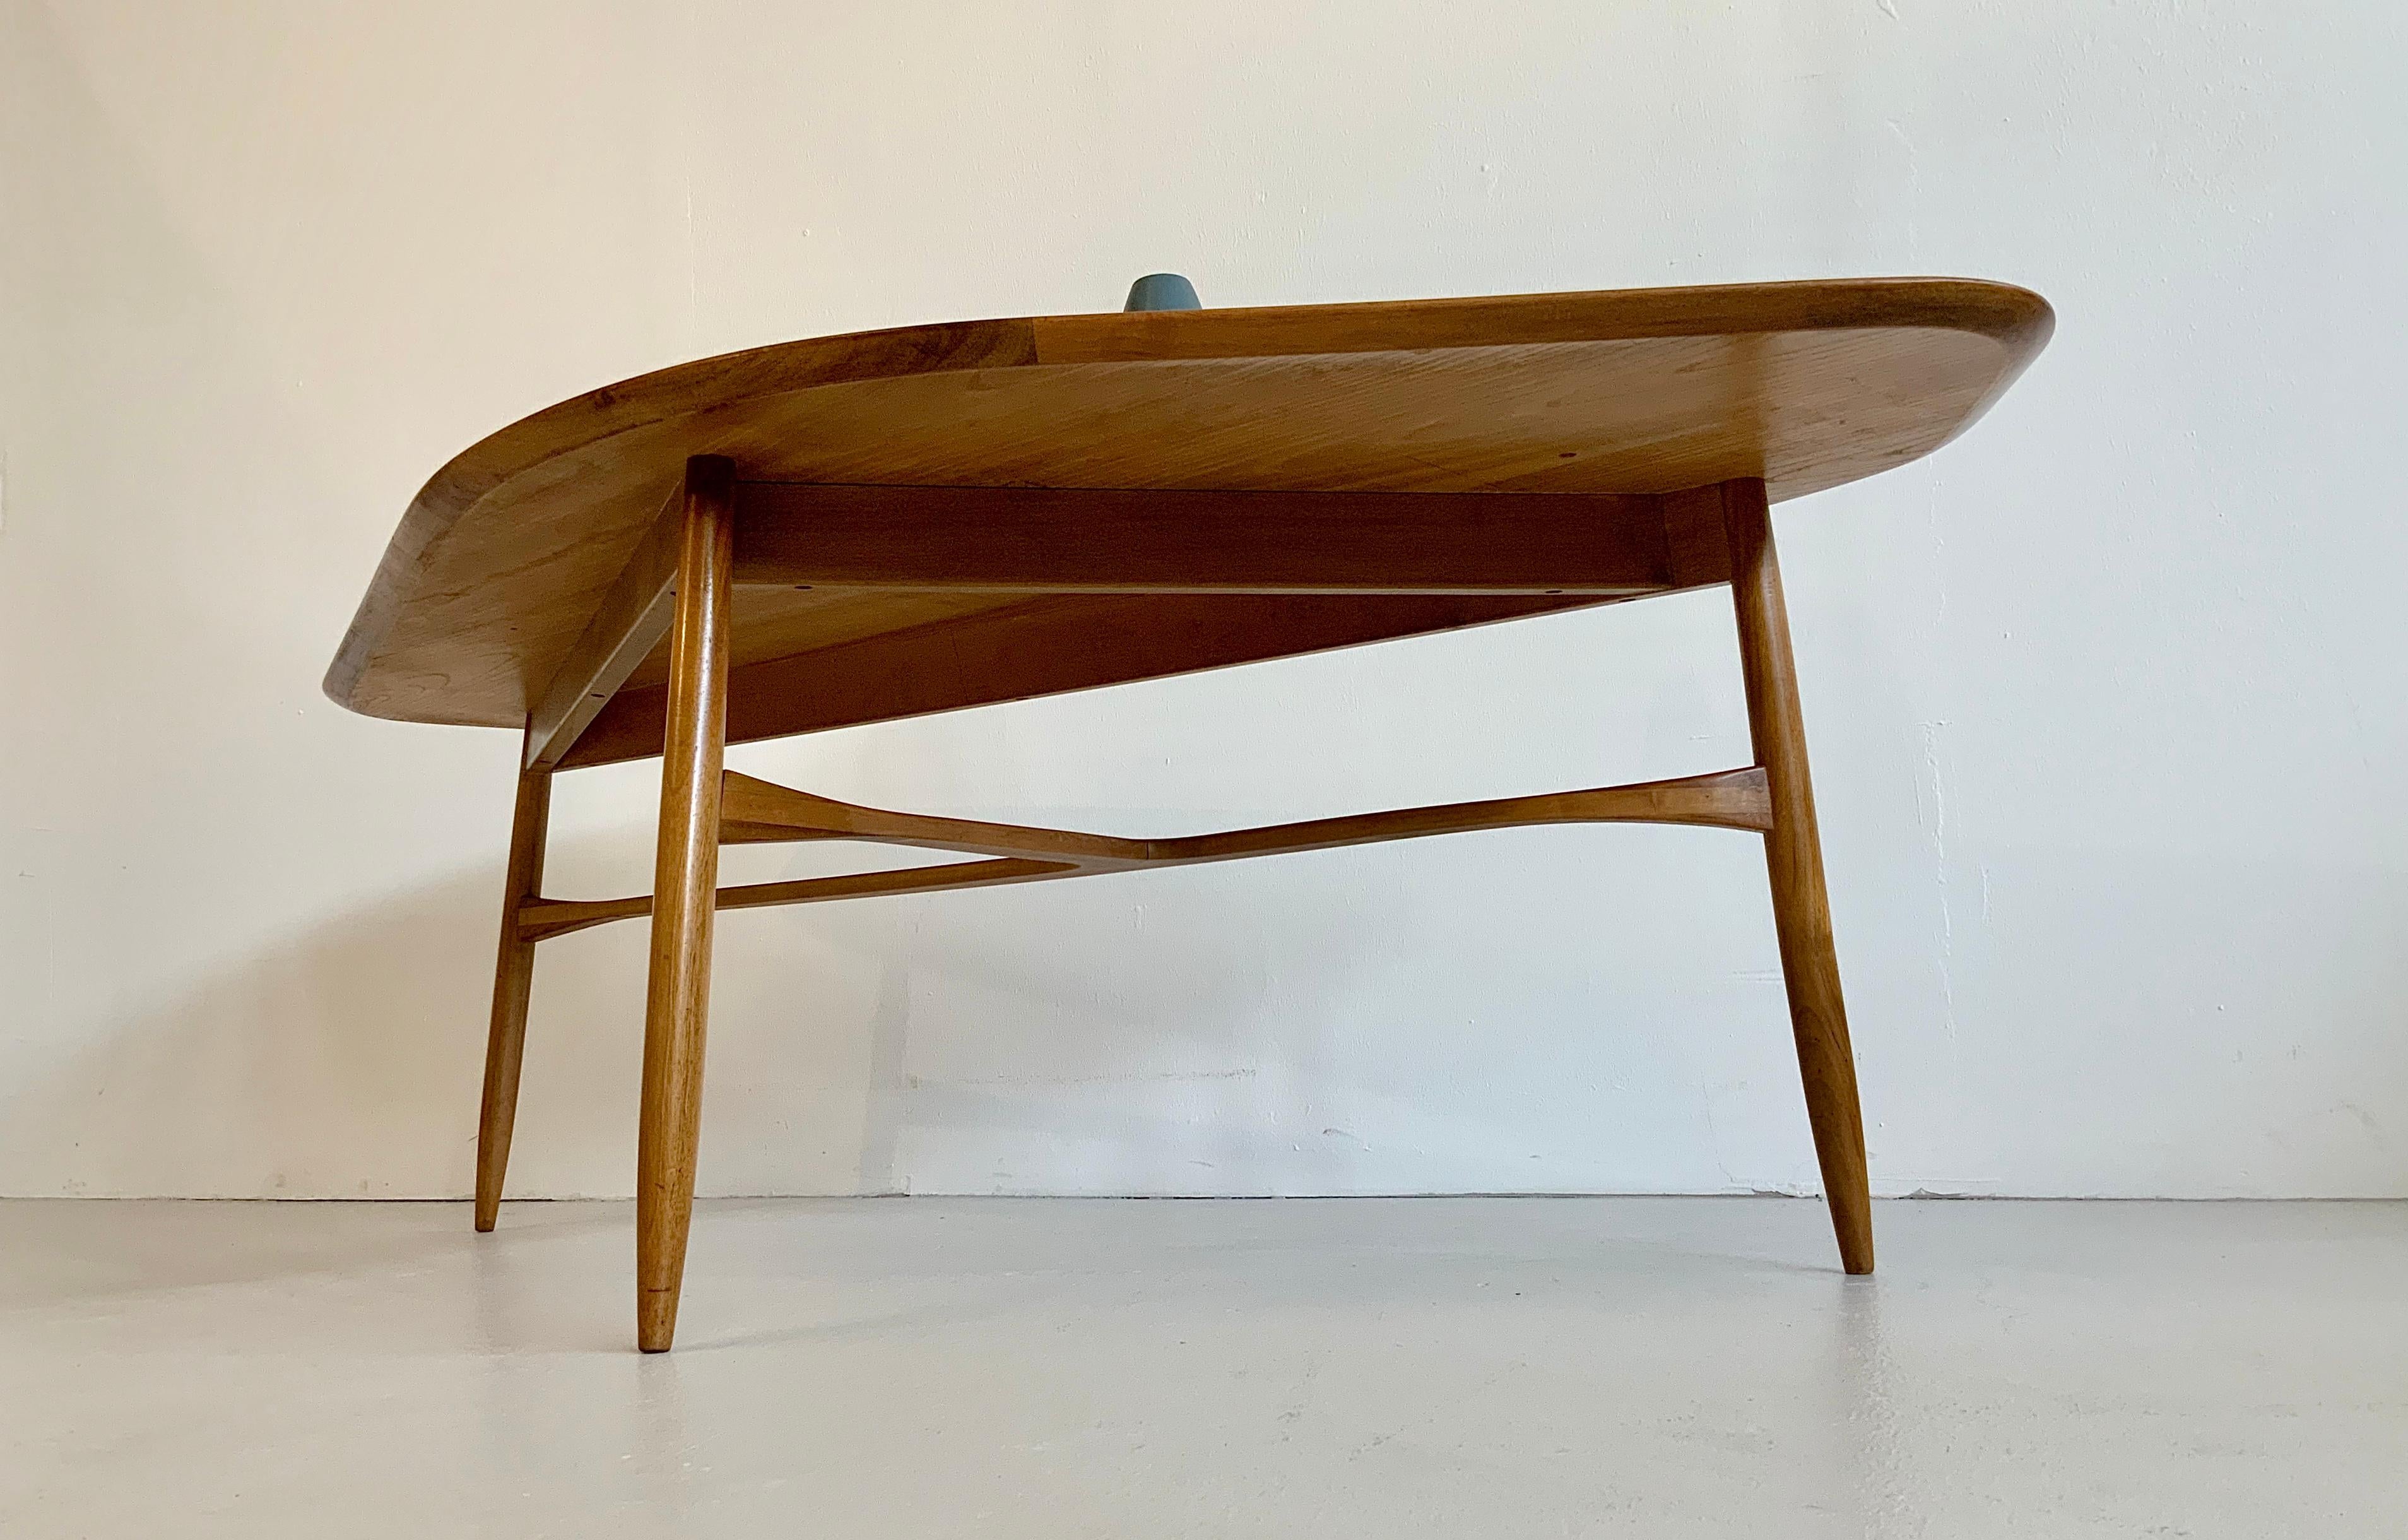 Large Svante Skogh for Laauser Midcentury Walnut Curved Coffee Table, 1950s For Sale 1